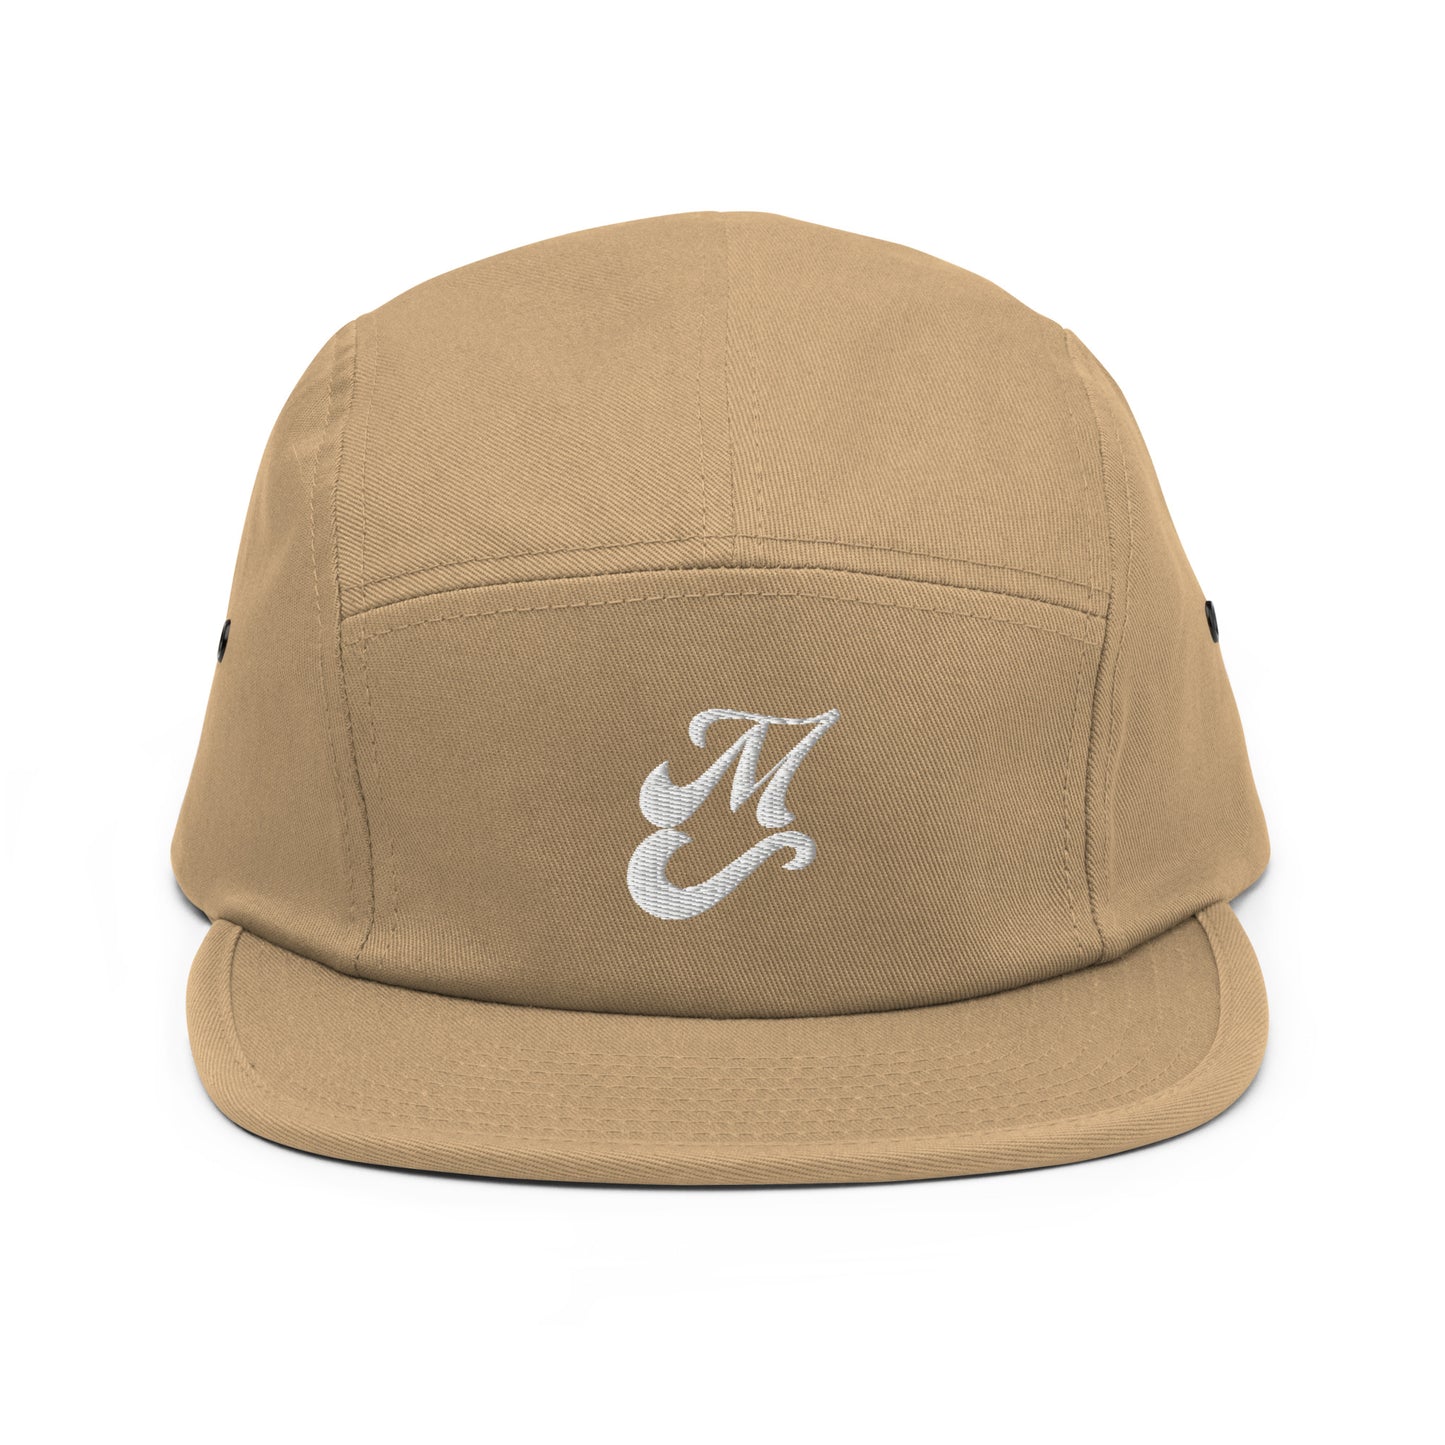 MS Logo 5 panel embroidered hat men's and women's unisex